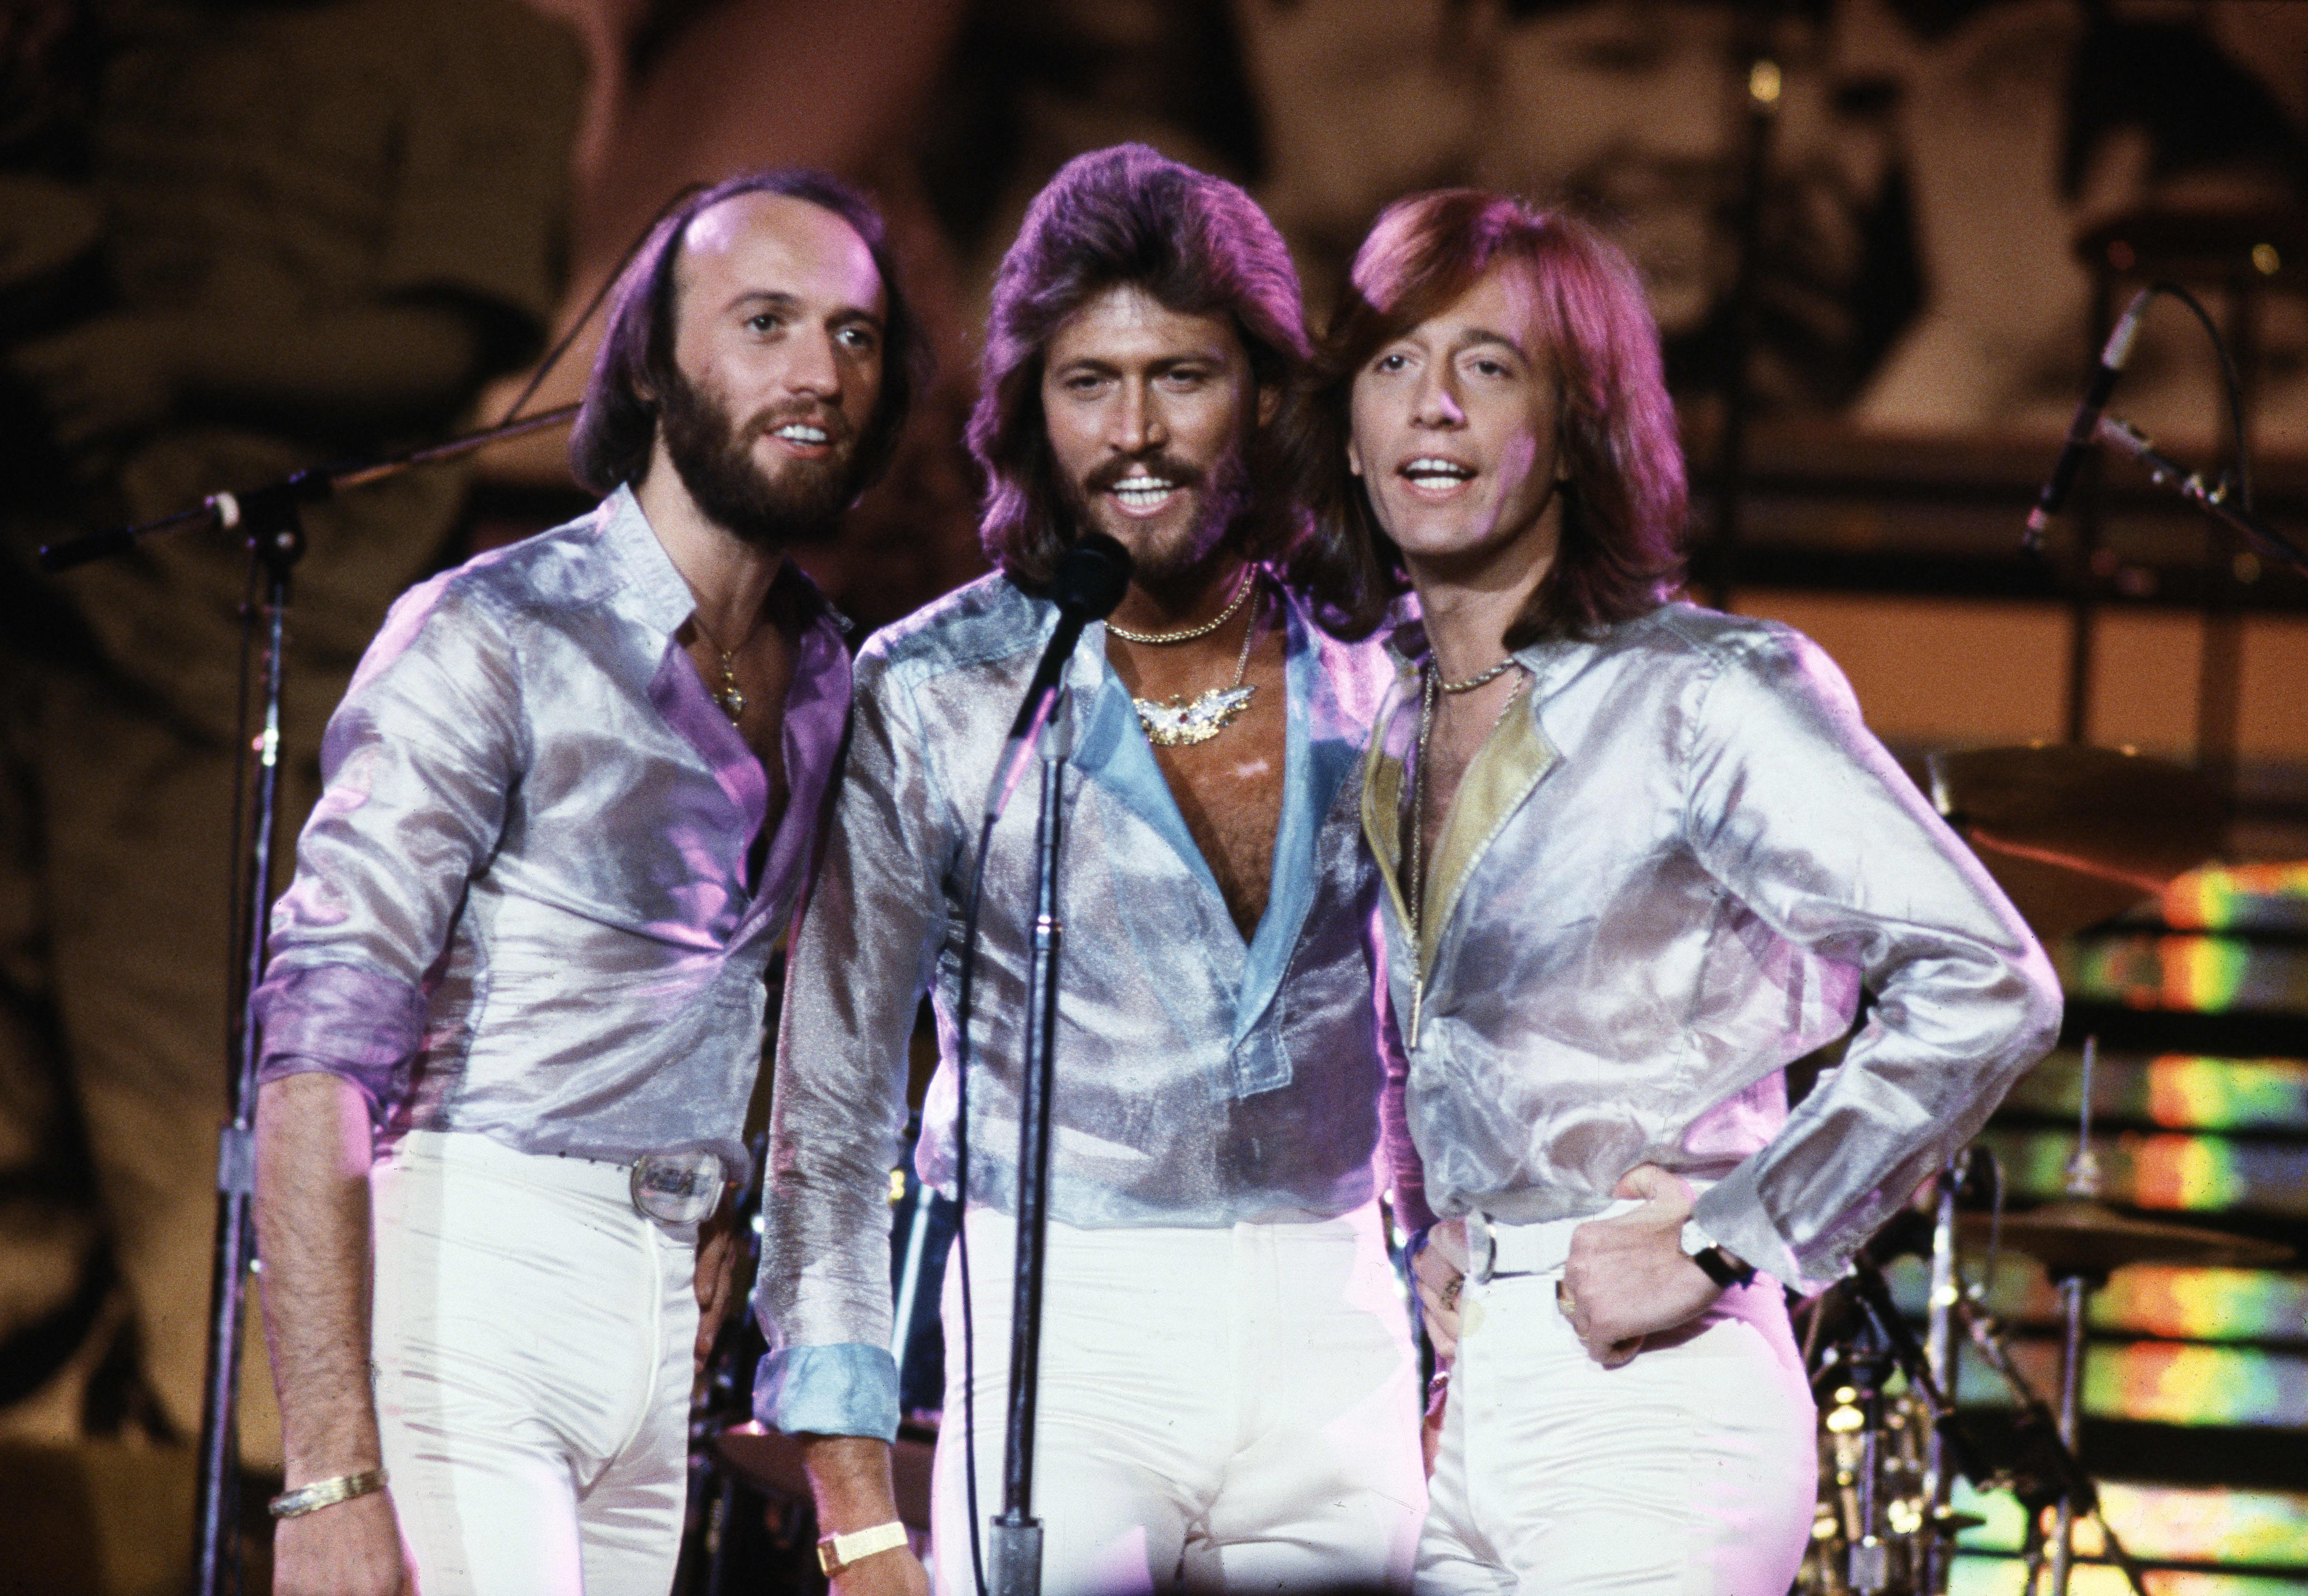 bee gees greatest hits listen free